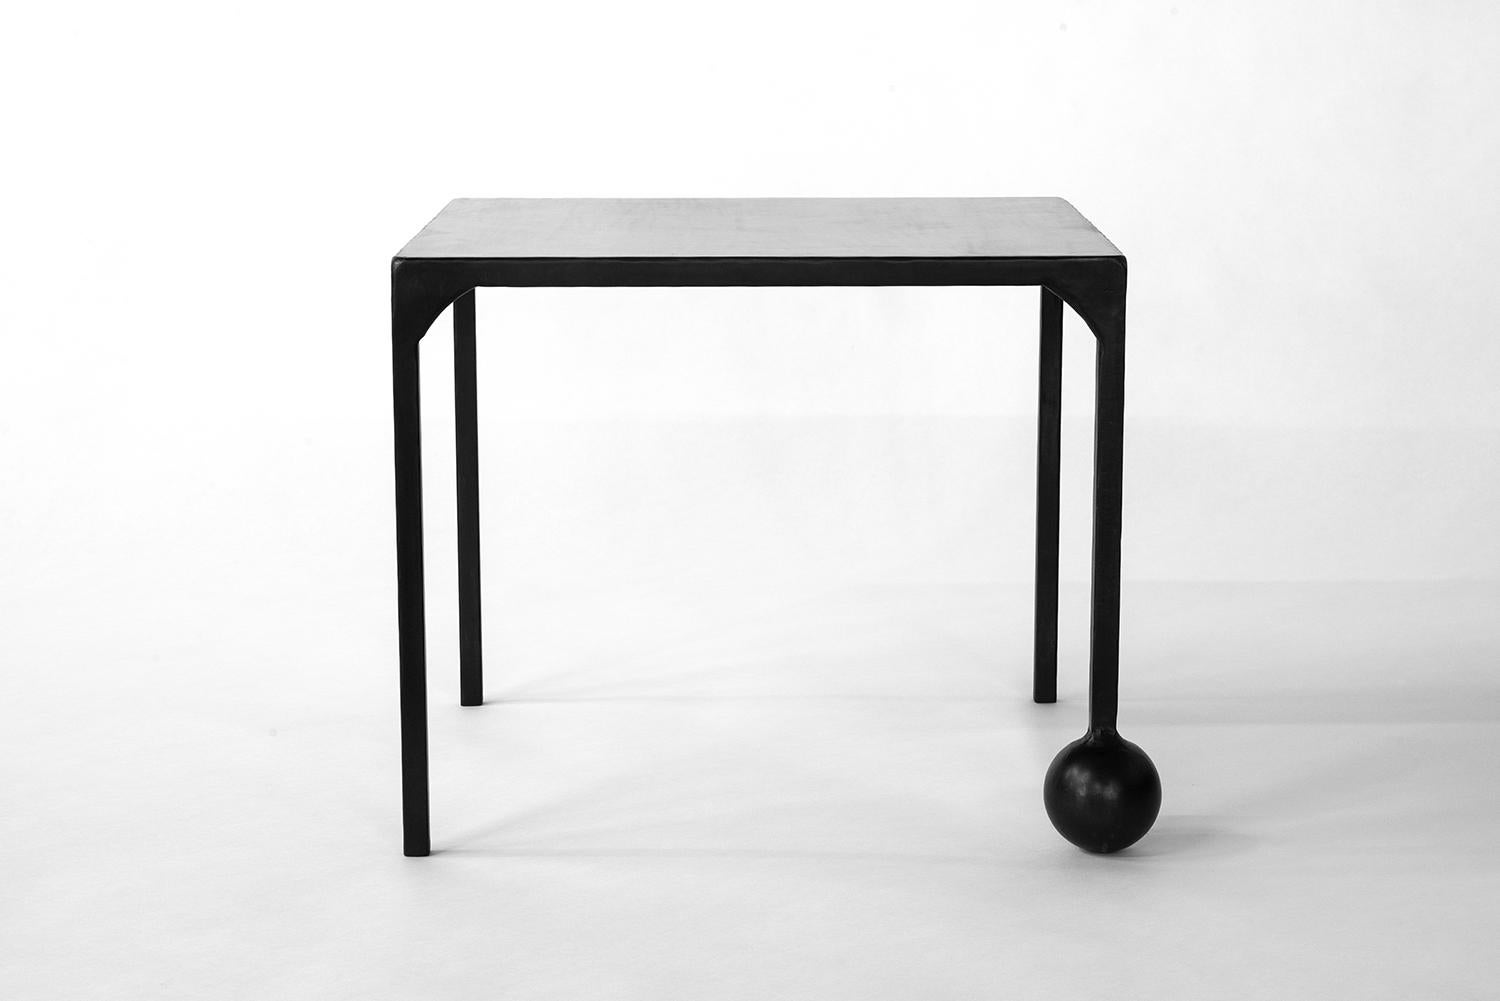 TABLE NO. 2 - SET
J.M. Szymanski
d. 2017

This geometric, solid, steel structure is supported by a cast-sphere base. The refined simplicity of this design speaks volumes, and adds depth and elegance to any space. 

Custom sizes available. Made in